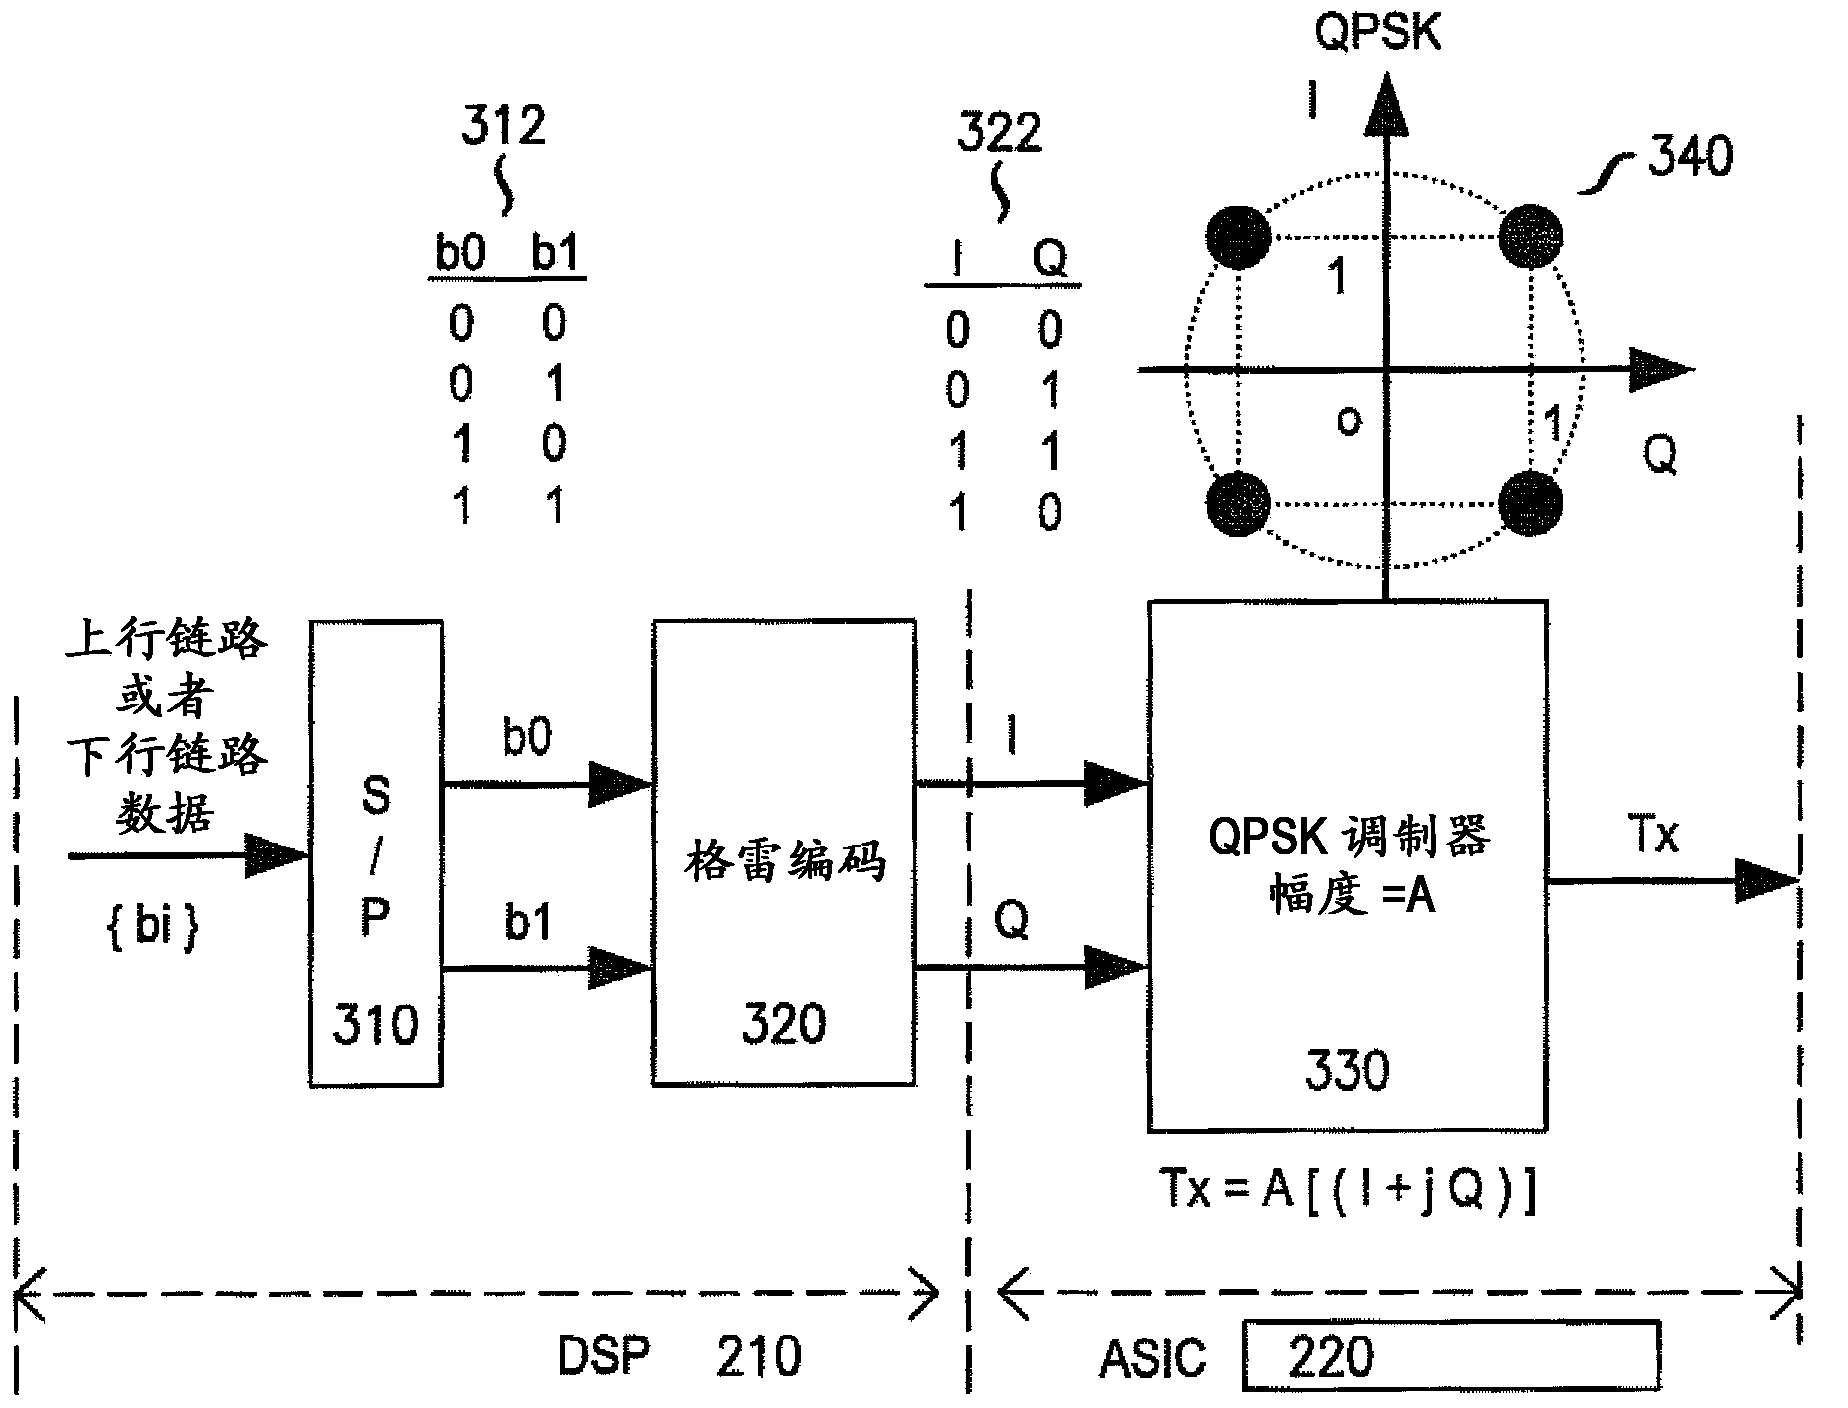 Method and apparatus for implementing high-order modulation schemes using low-order modulators